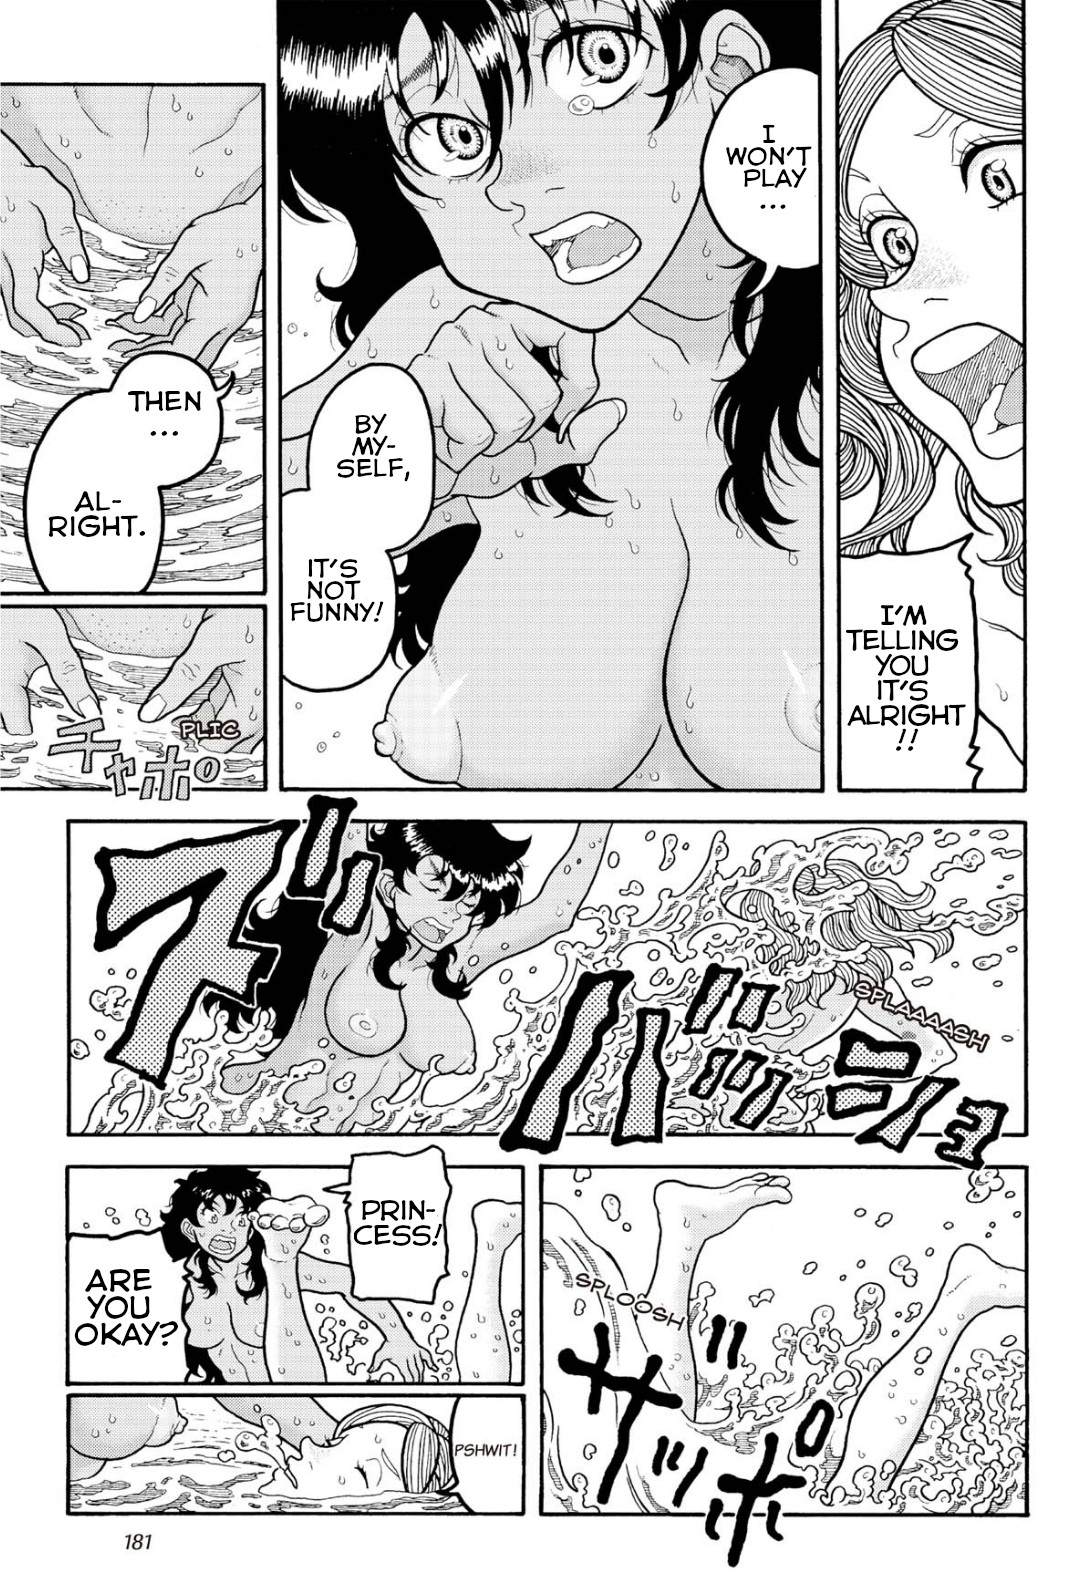 Princess Candle Vol.2 Chapter 12: I'm really happy!